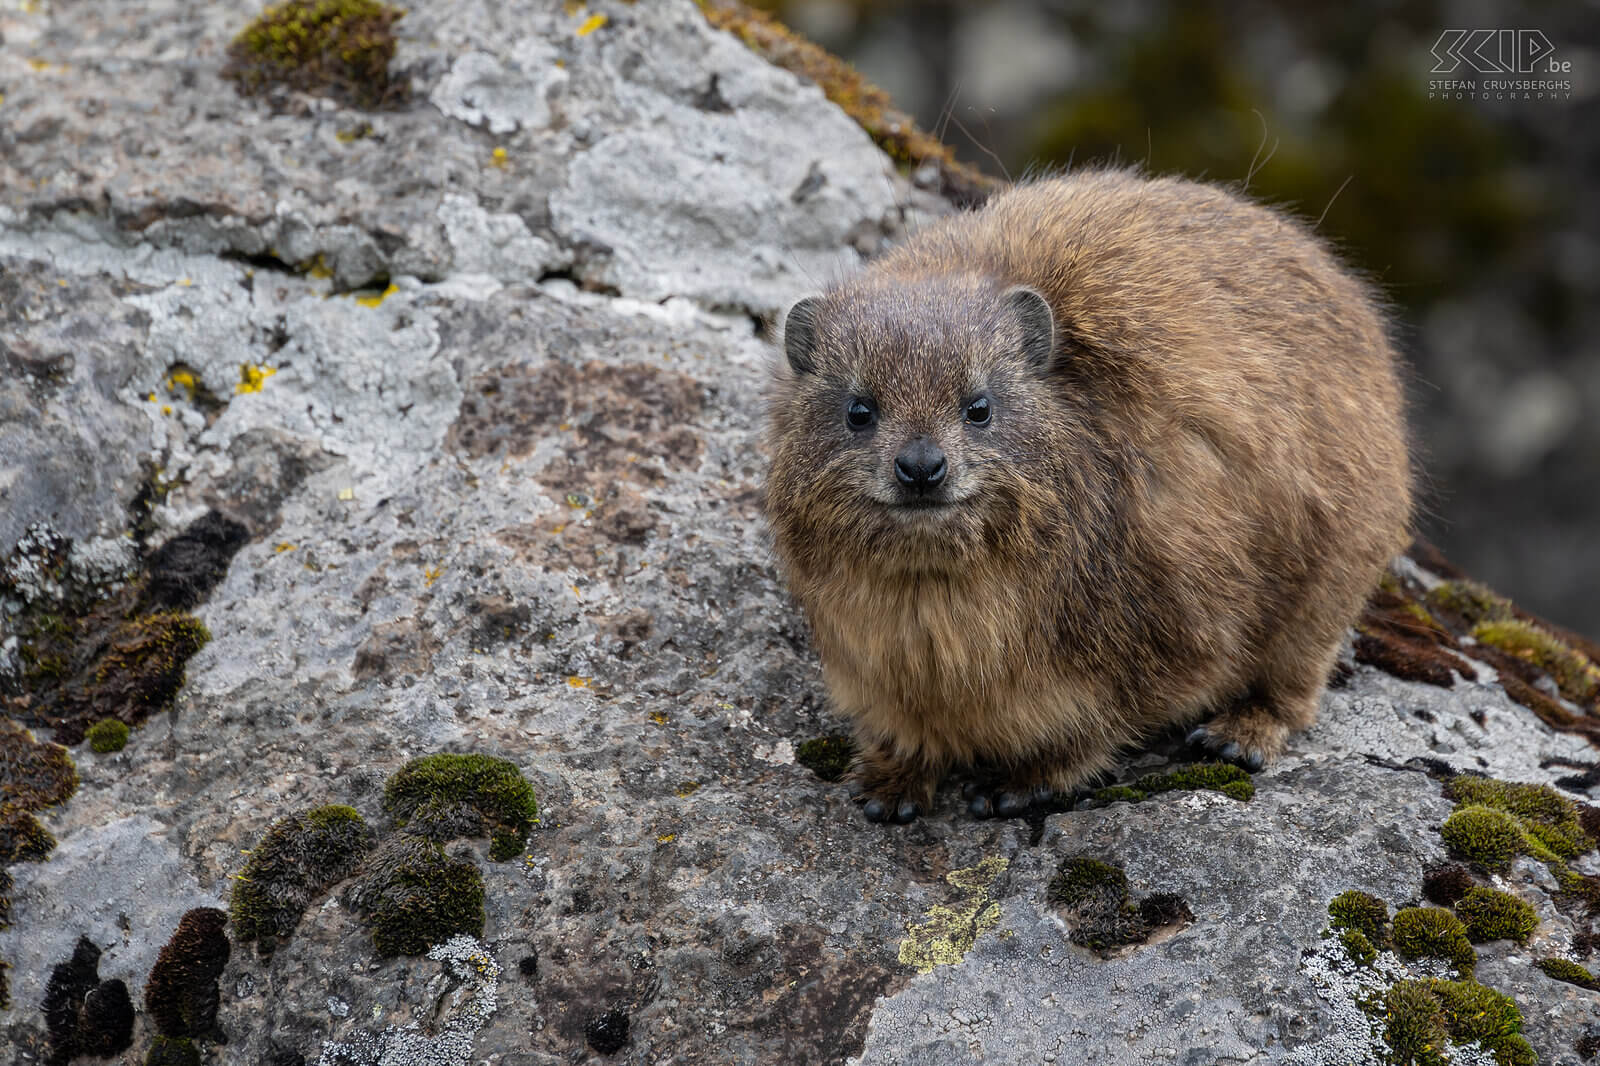 Mount Kenya - Rock hyrax The rock hyrax is also called dassie and it can be found easily on the rocks on Mount Kenya. Stefan Cruysberghs